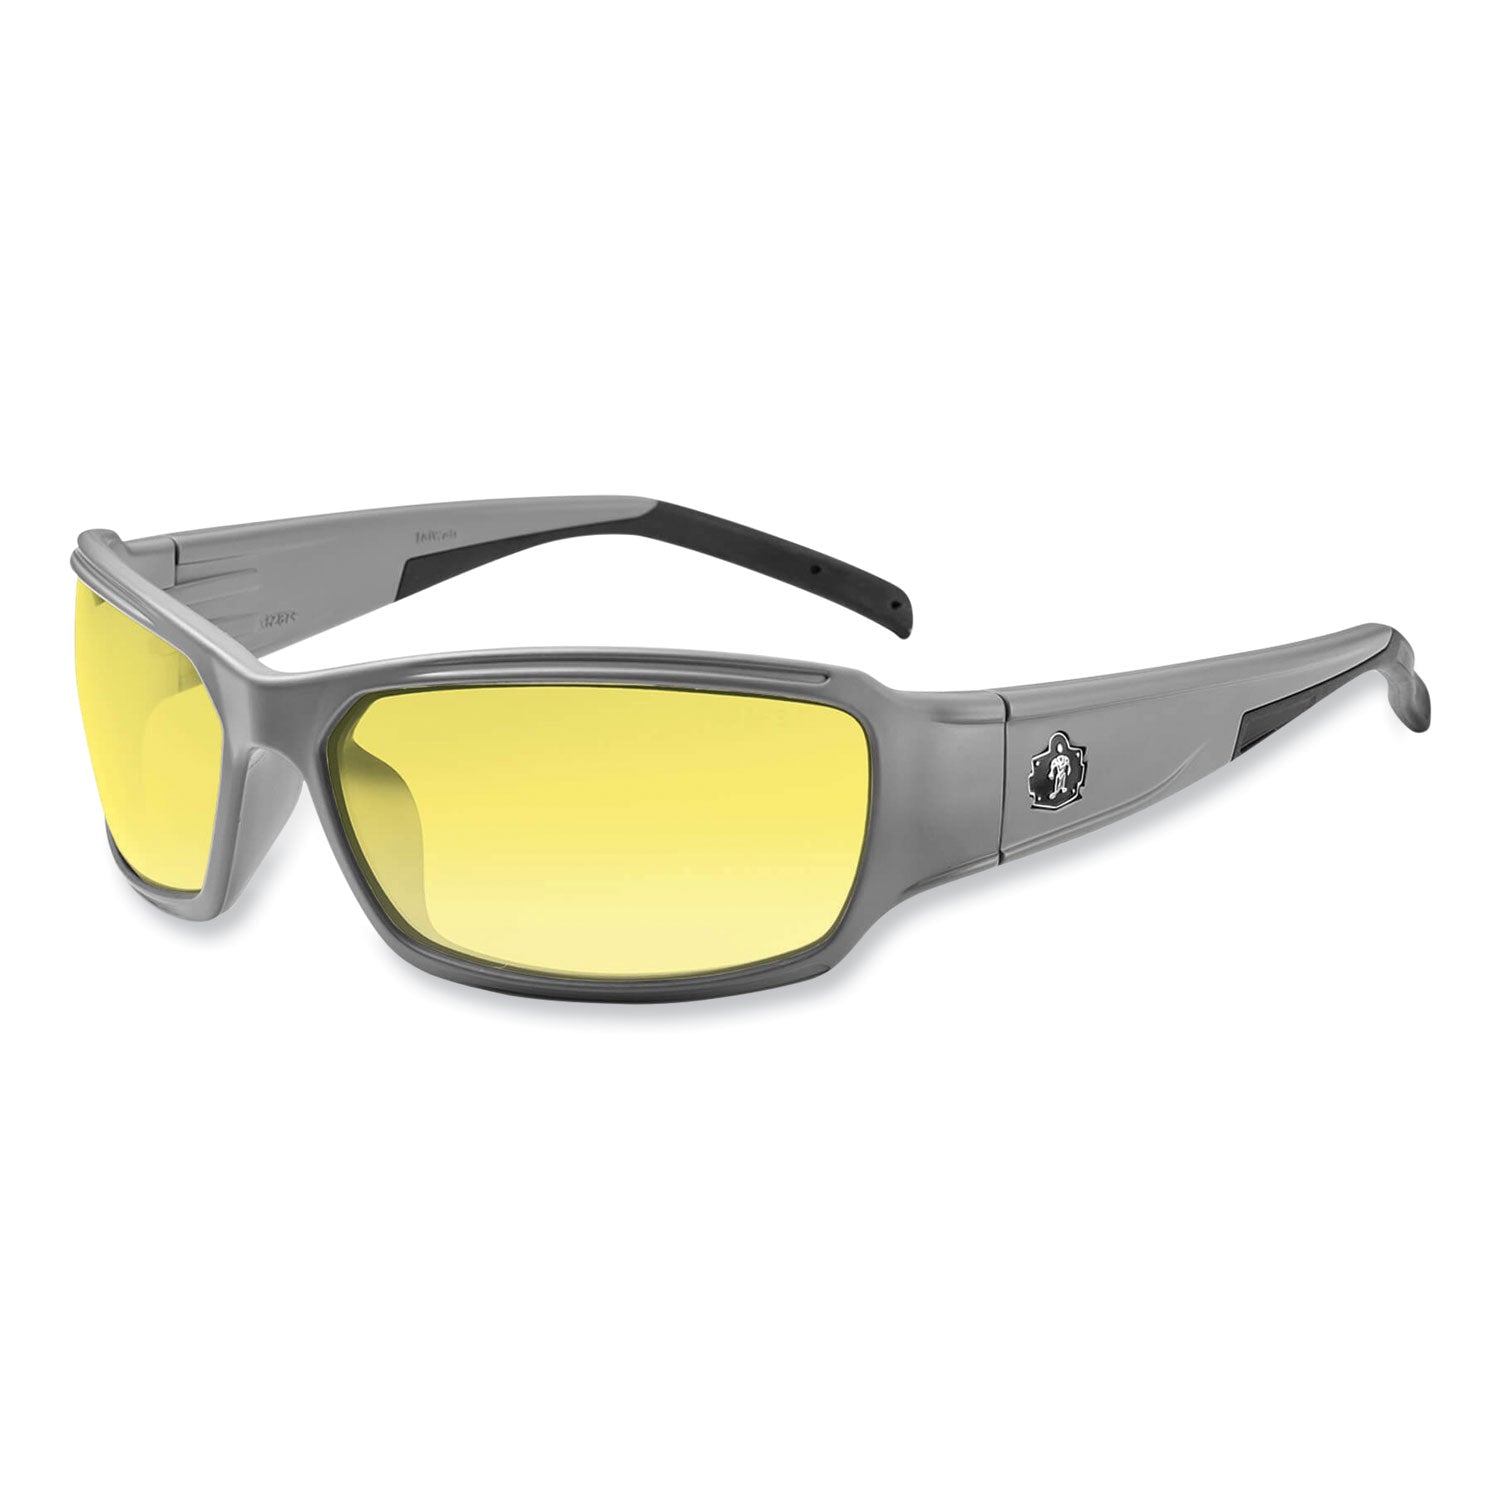 skullerz-thor-safety-glasses-matte-gray-nylon-impact-frame-yellow-polycarbonate-lens-ships-in-1-3-business-days_ego51150 - 1